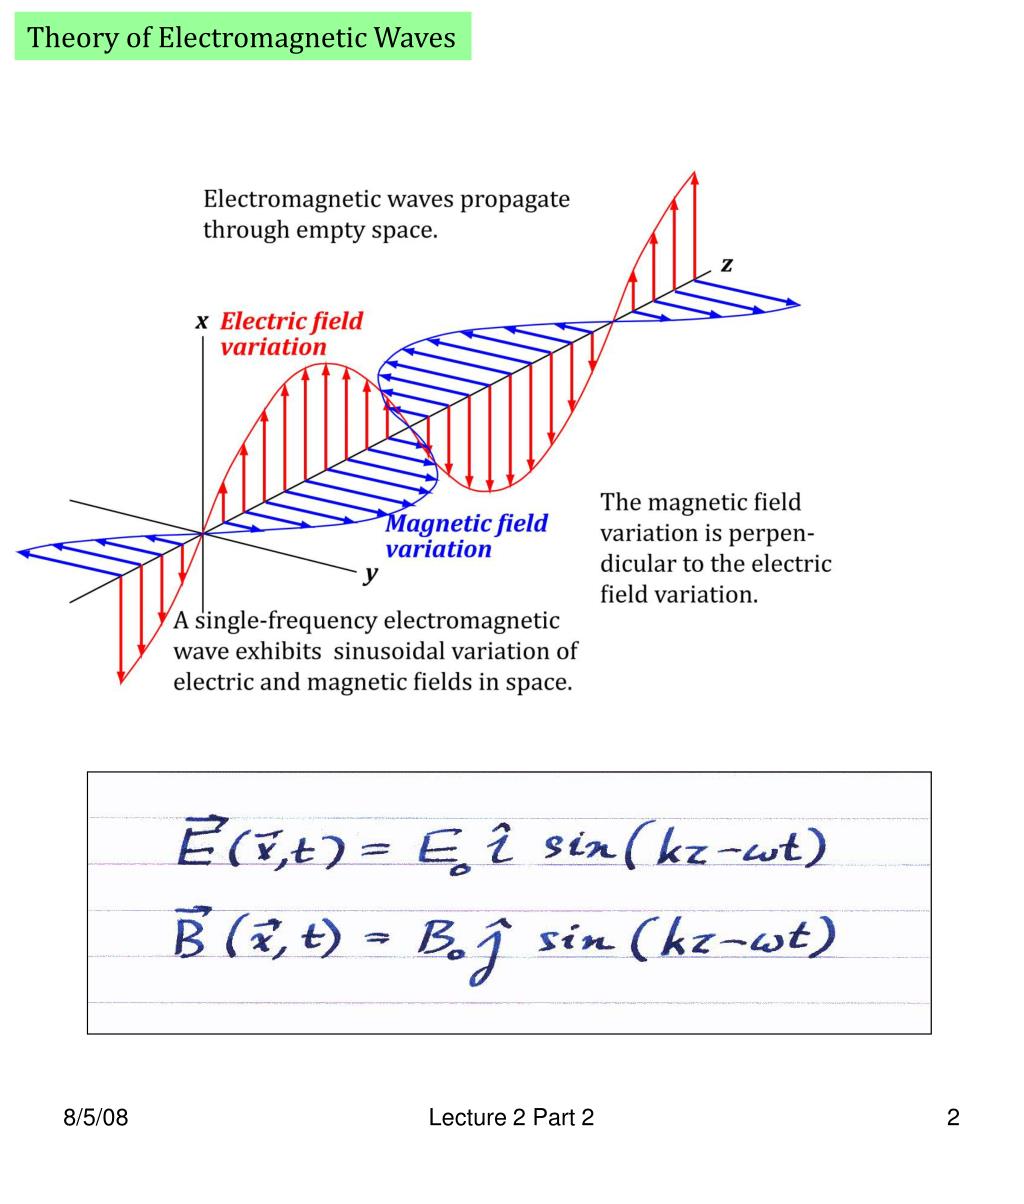 Ppt Maxwells Equations Of The Electromagnetic Field Theory Powerpoint Presentation Id626279 3286